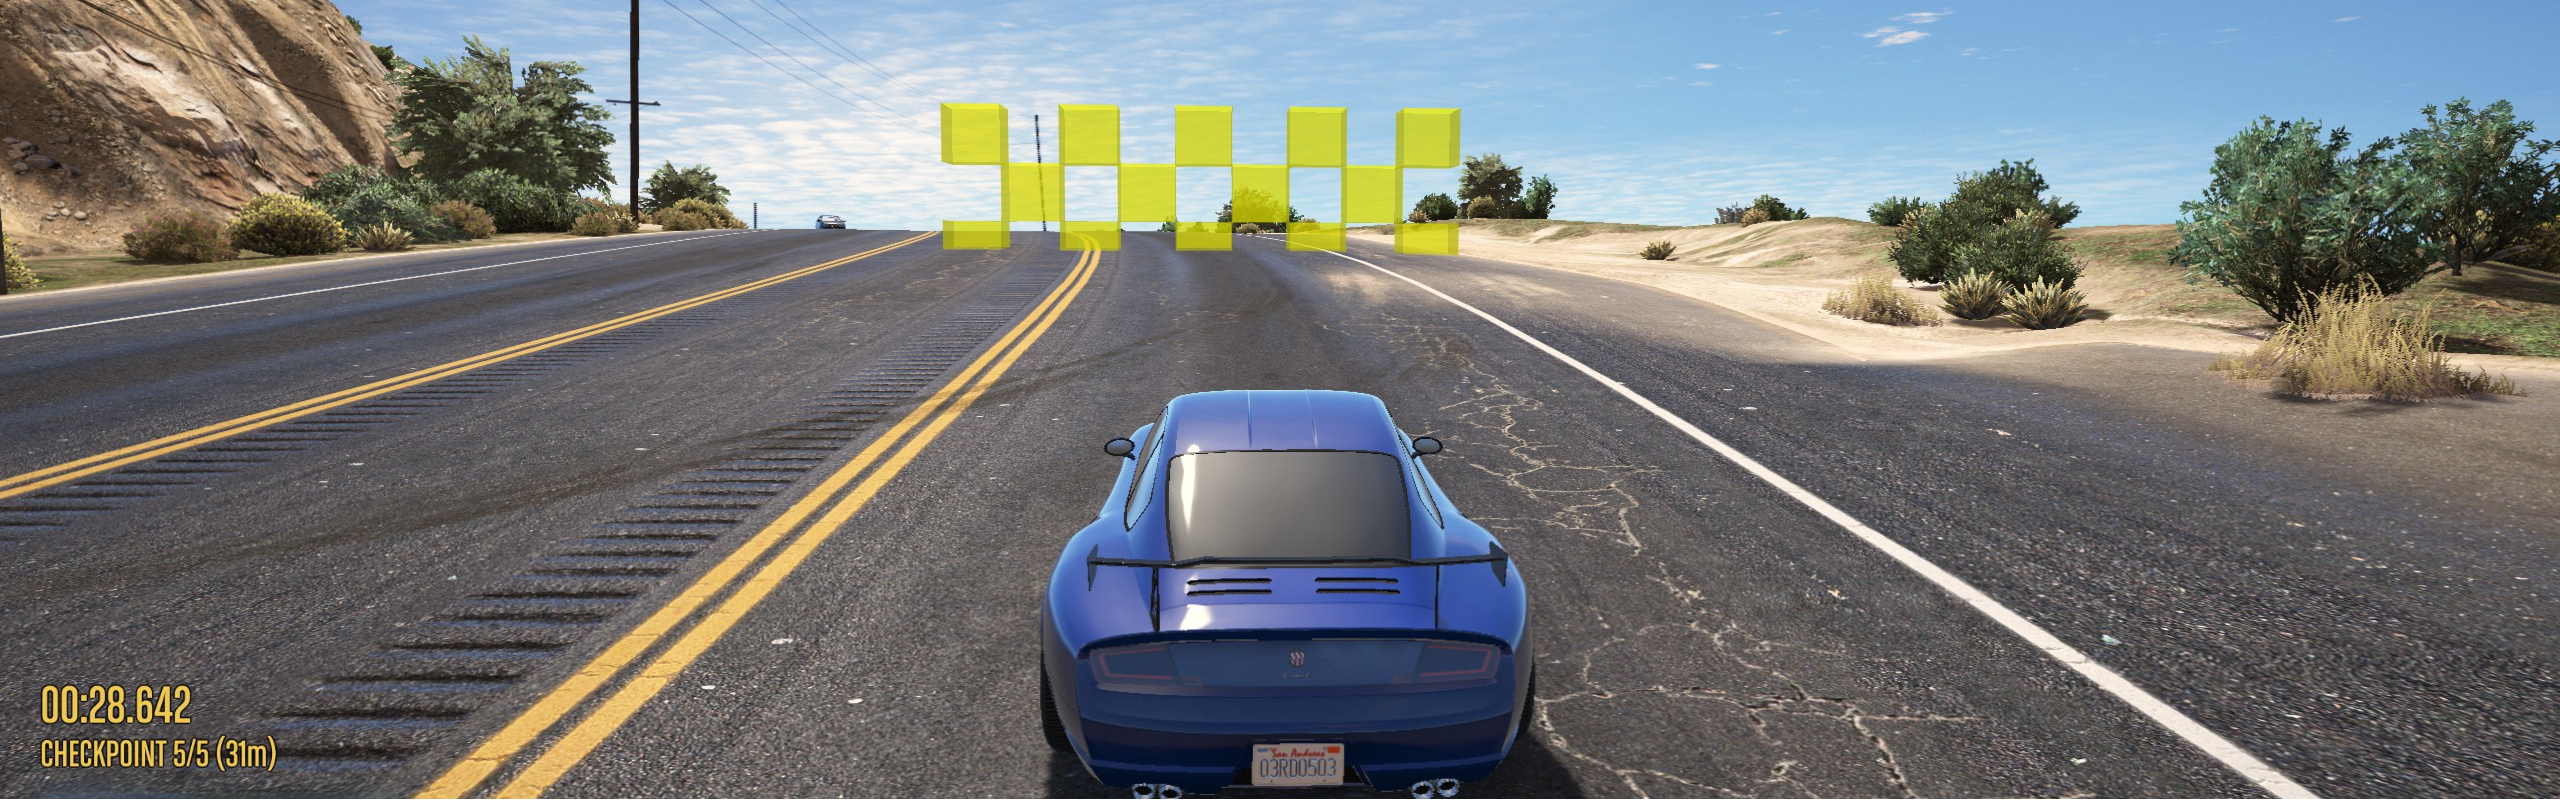 Release Streetraces Multiplayer Races With Checkpoints Hud And